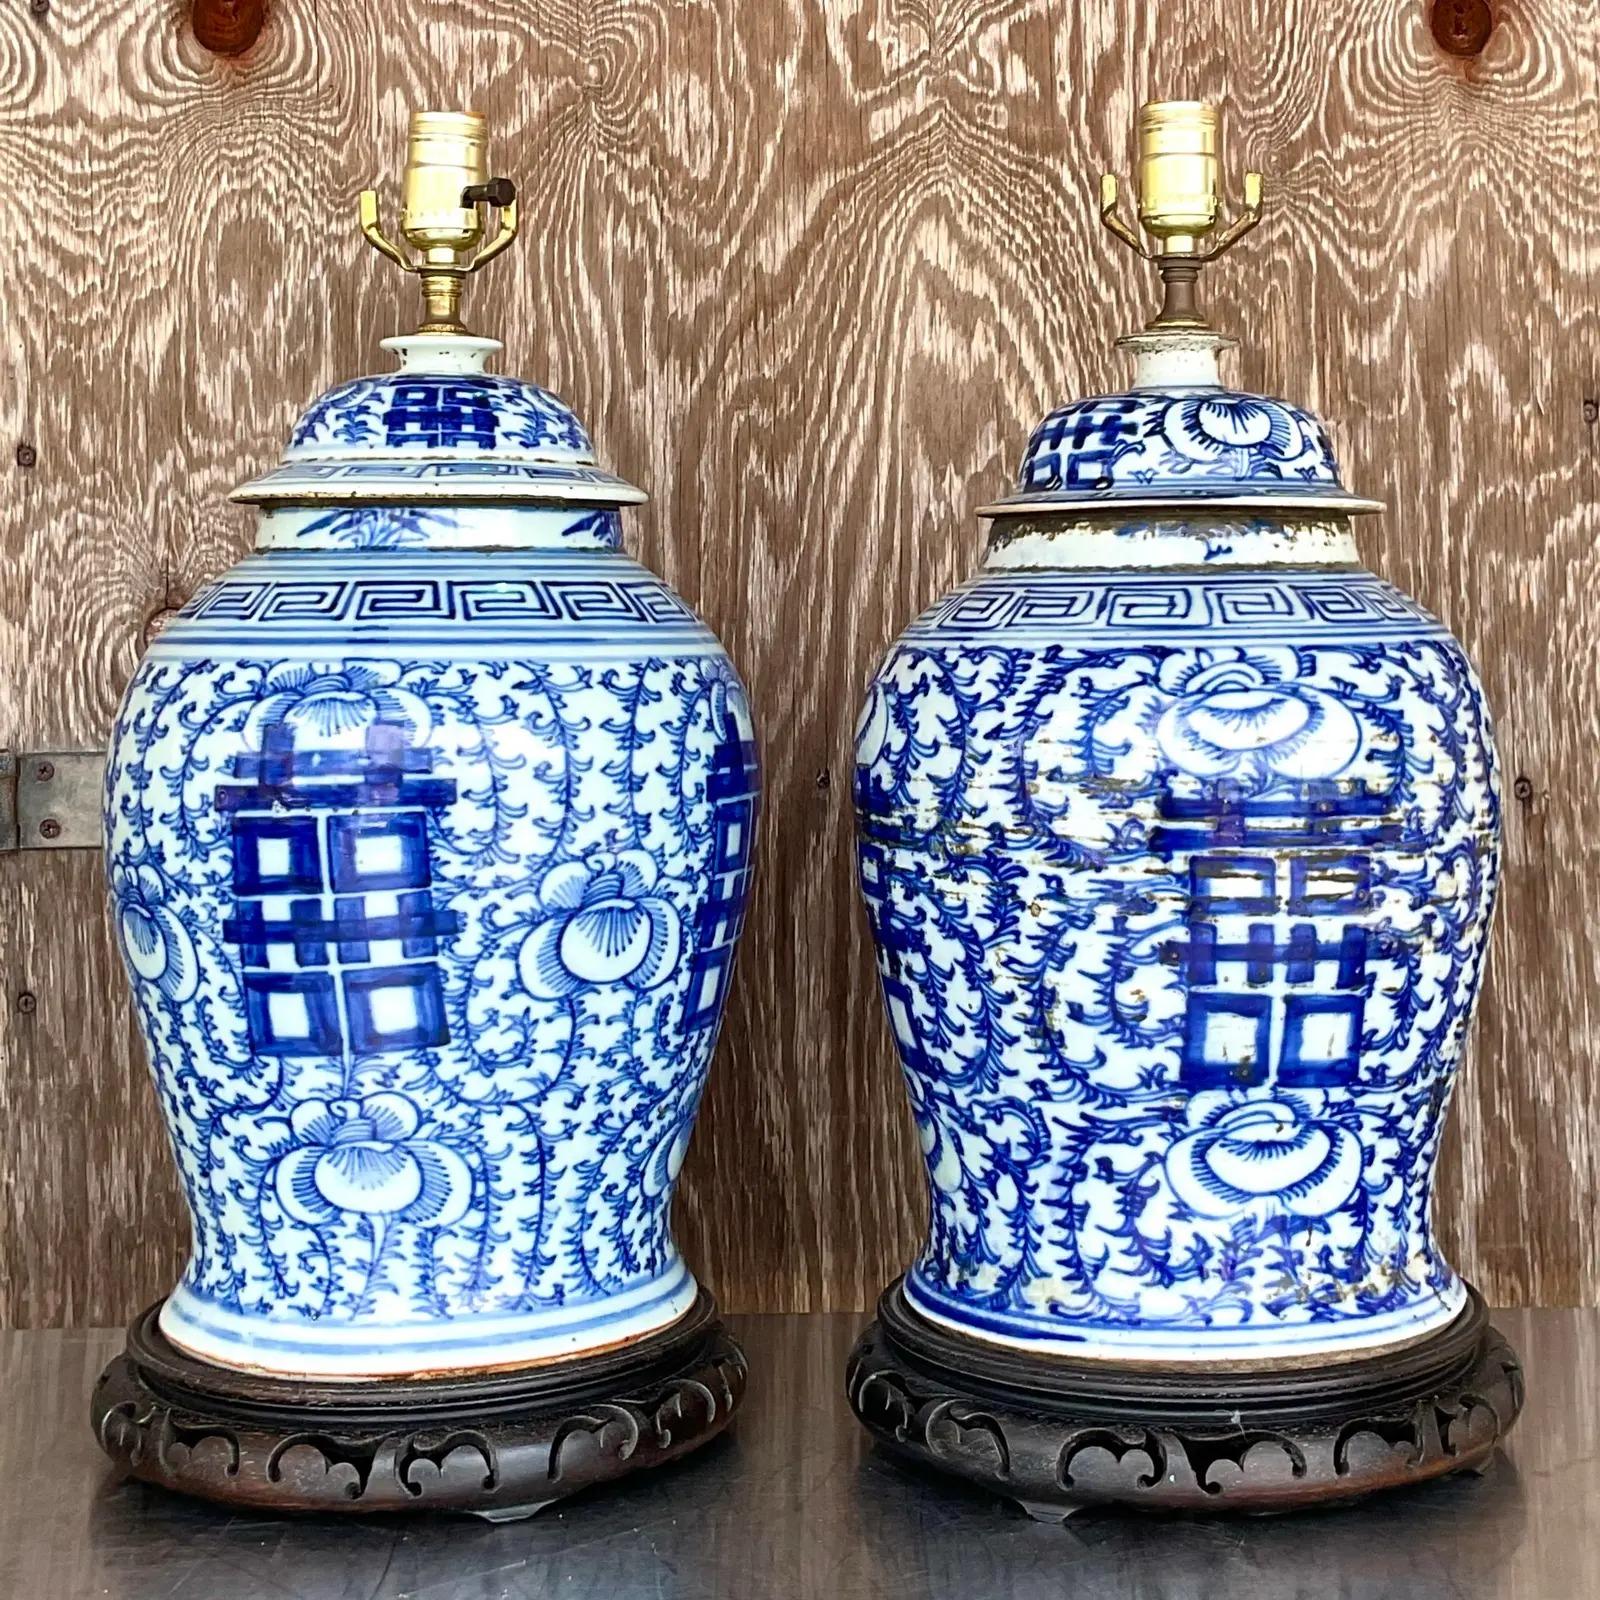 Incredible pair of vintage Asian table lamps. Beautiful iconic blue and white on thick glazed pottery. Done on the classic ginger jar shape with carved plinths. Acquired from a Palm Beach estate.

The lamps are in great vintage condition. Minor